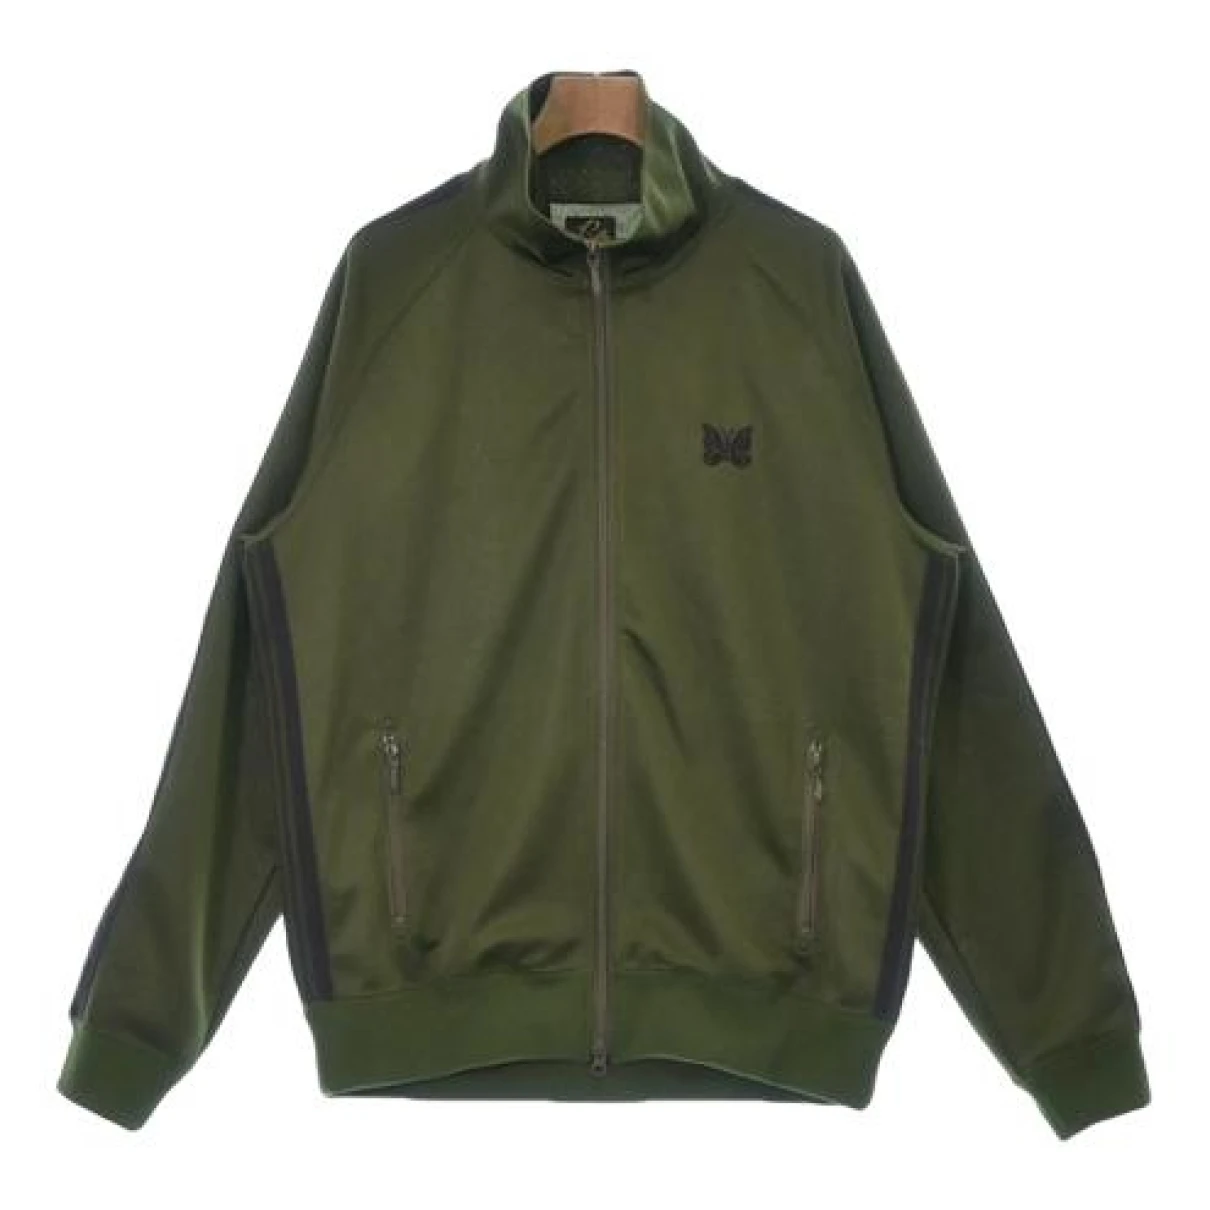 Pre-owned Needles Jacket In Green